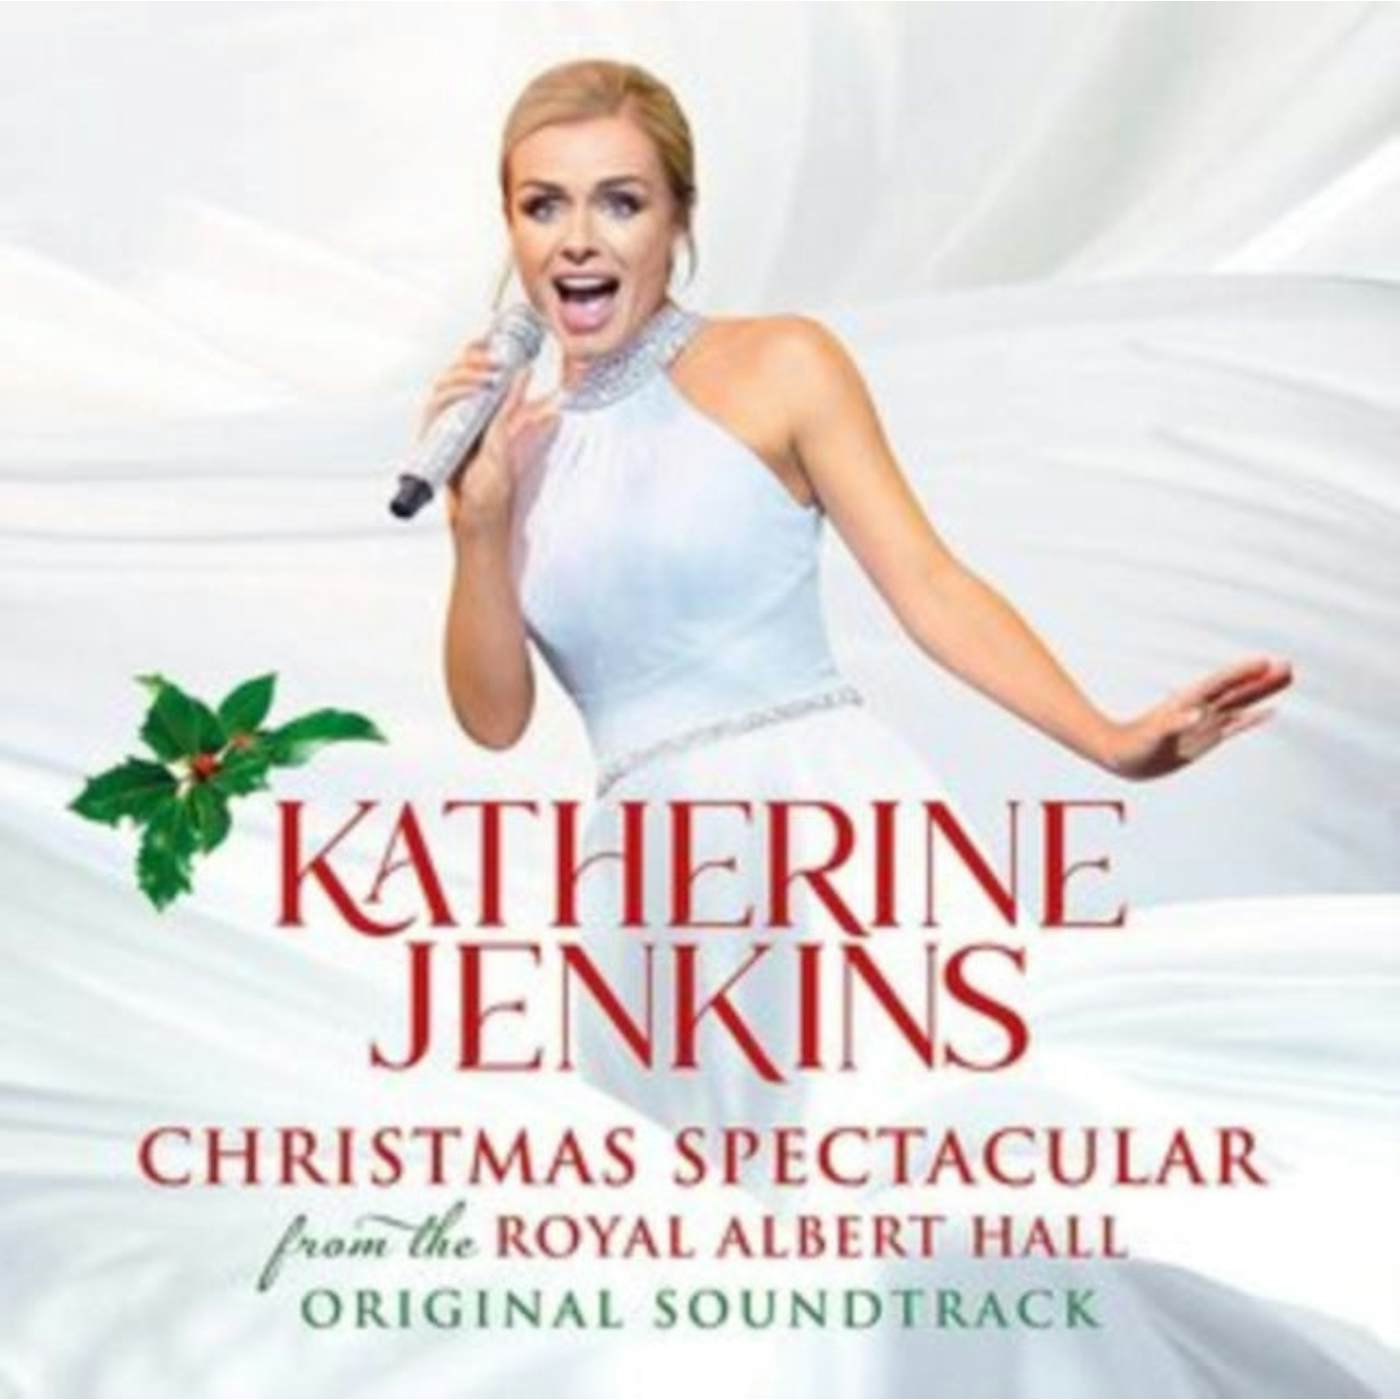 Katherine Jenkins CD - Christmas Spectacular From The Royal Albert Hall